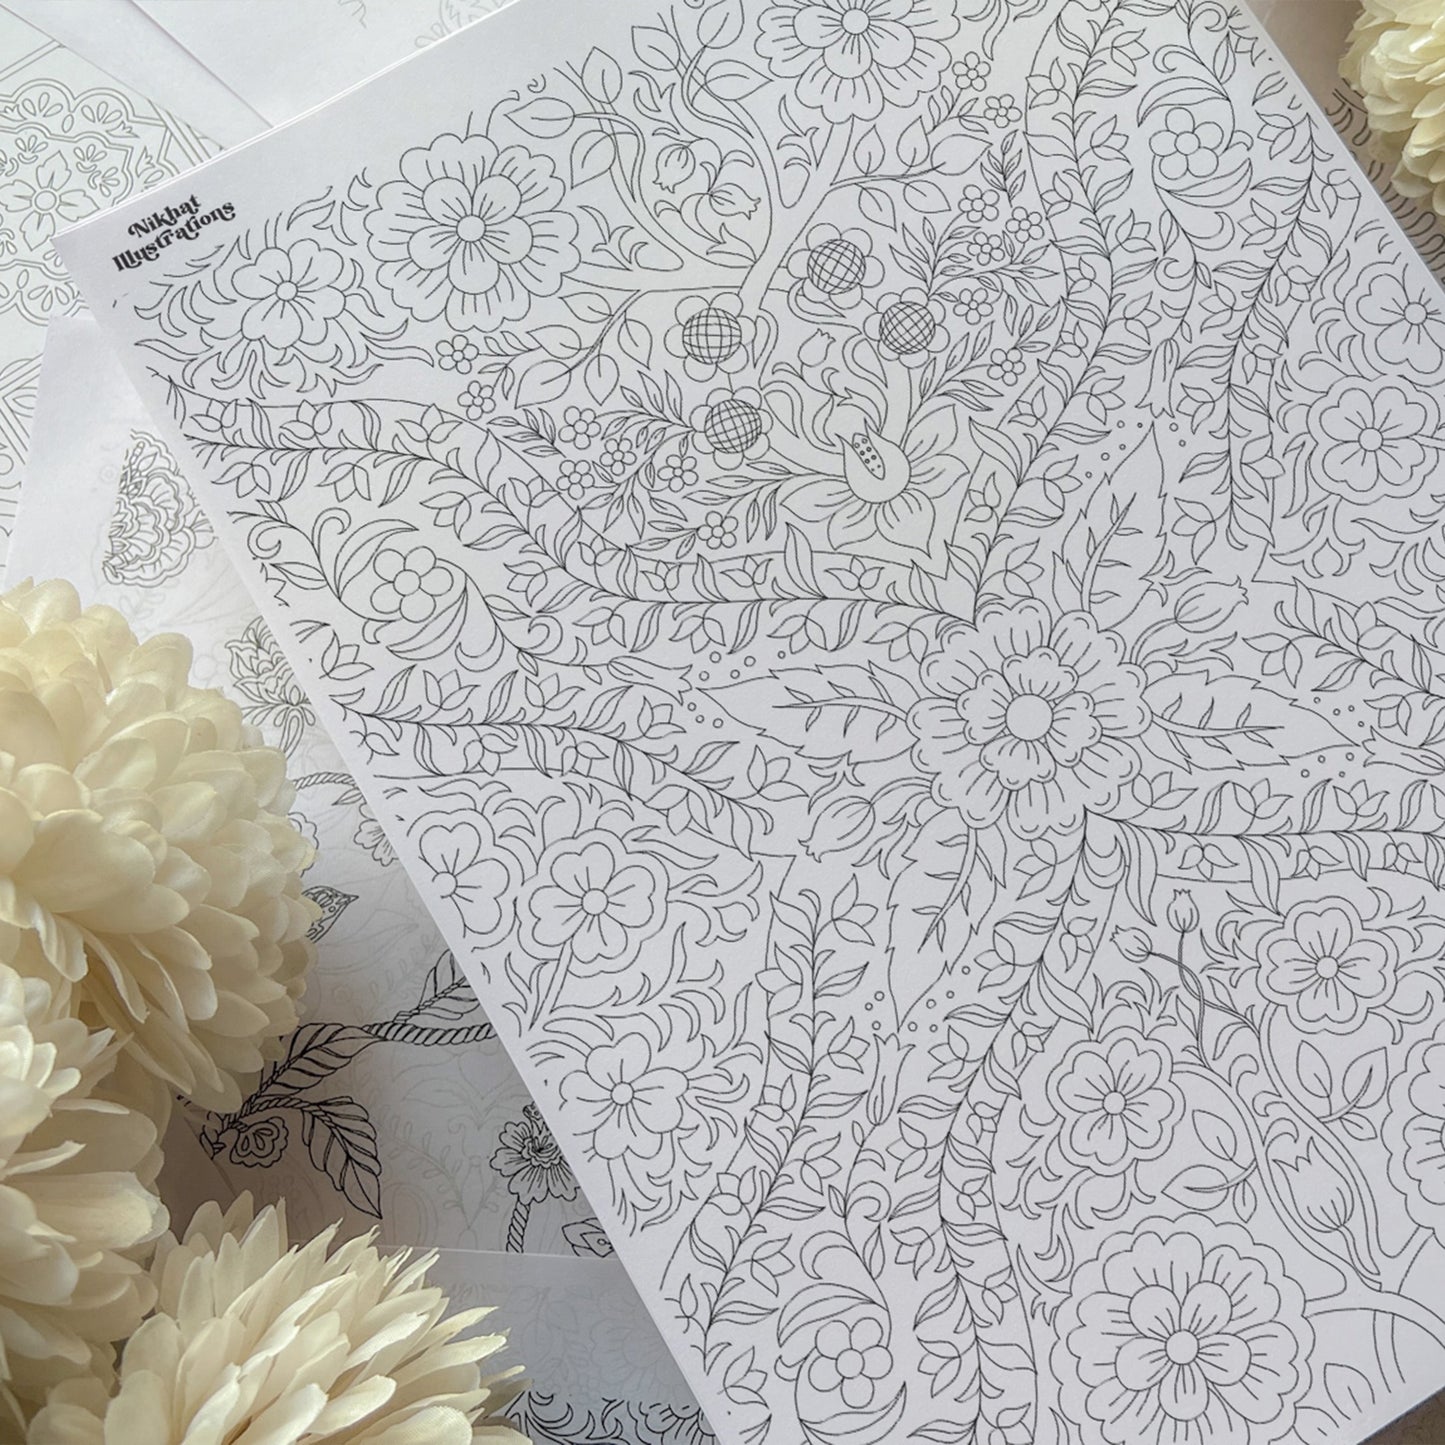 Intricate Florals | PDF Adult Coloring Page | Instant Download